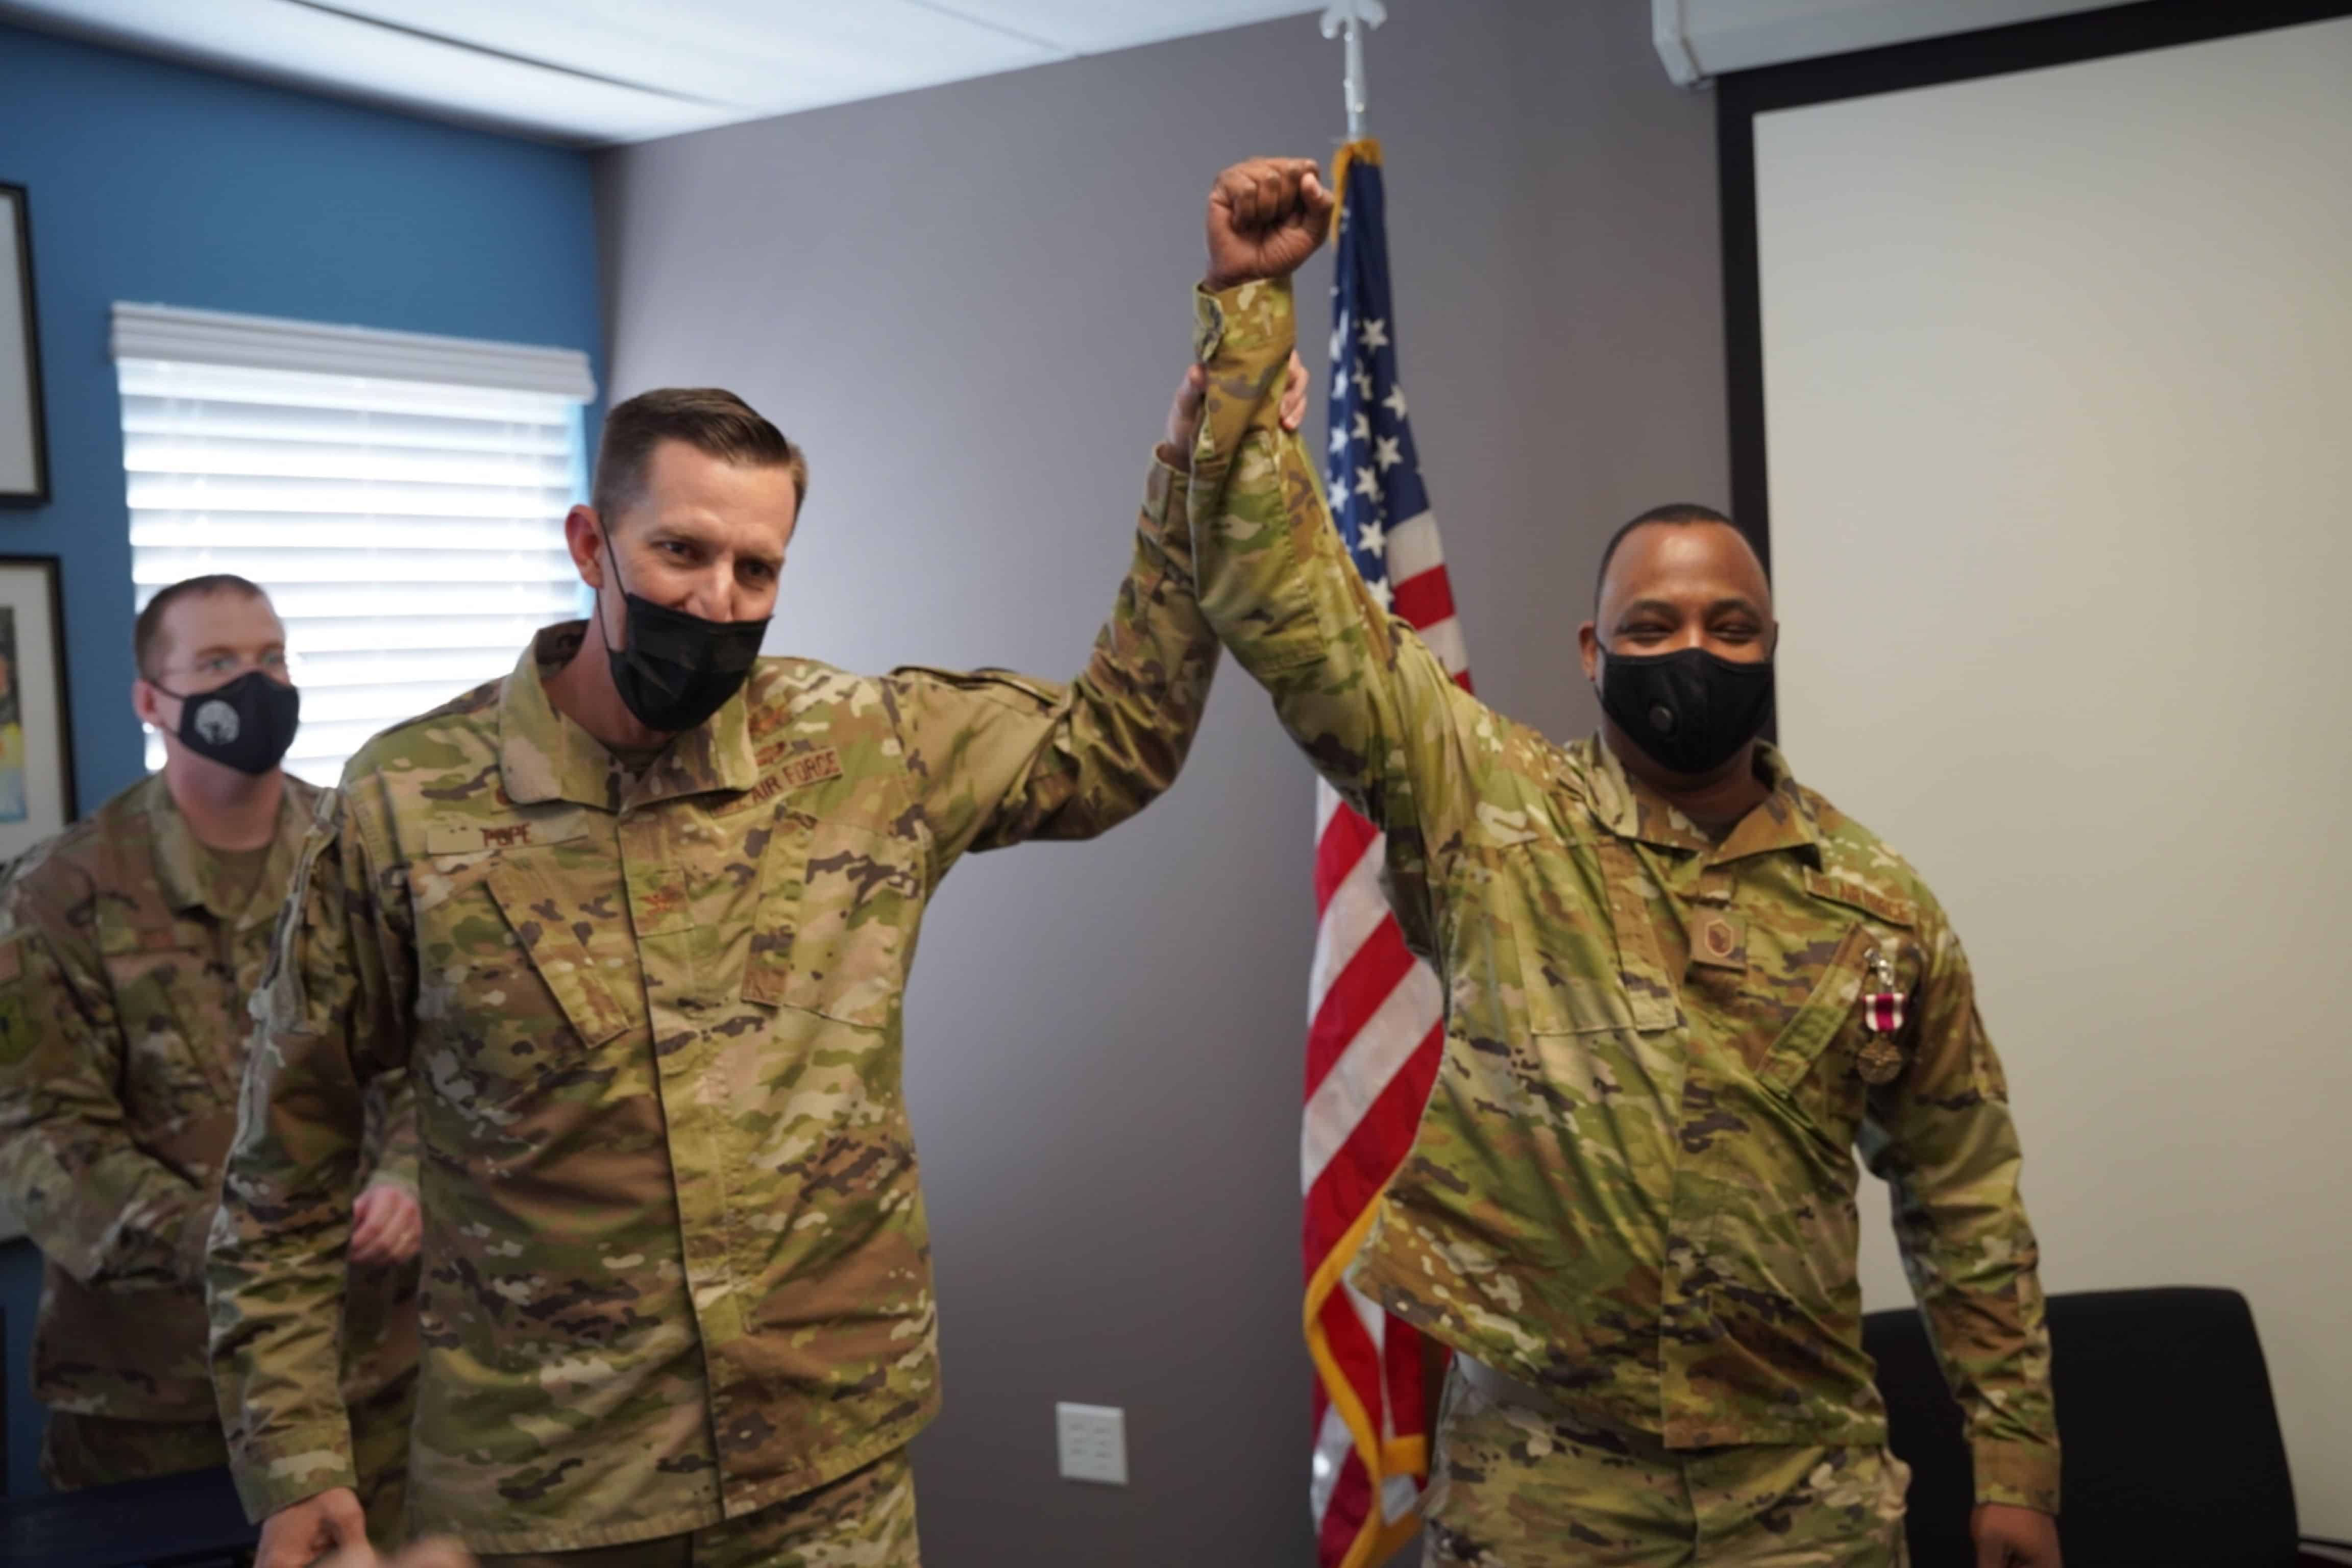 U.S. Air Force Master Sgt. Whitsey receives a standing ovation for his service, comradery, and hard work, prompted by Col. Billy Pope, during the conclusion of his retirement ceremony, hosted by the 690th Cyberspace Operations Group, Oct. 27, 2021 at Port San Antonio, Texas.